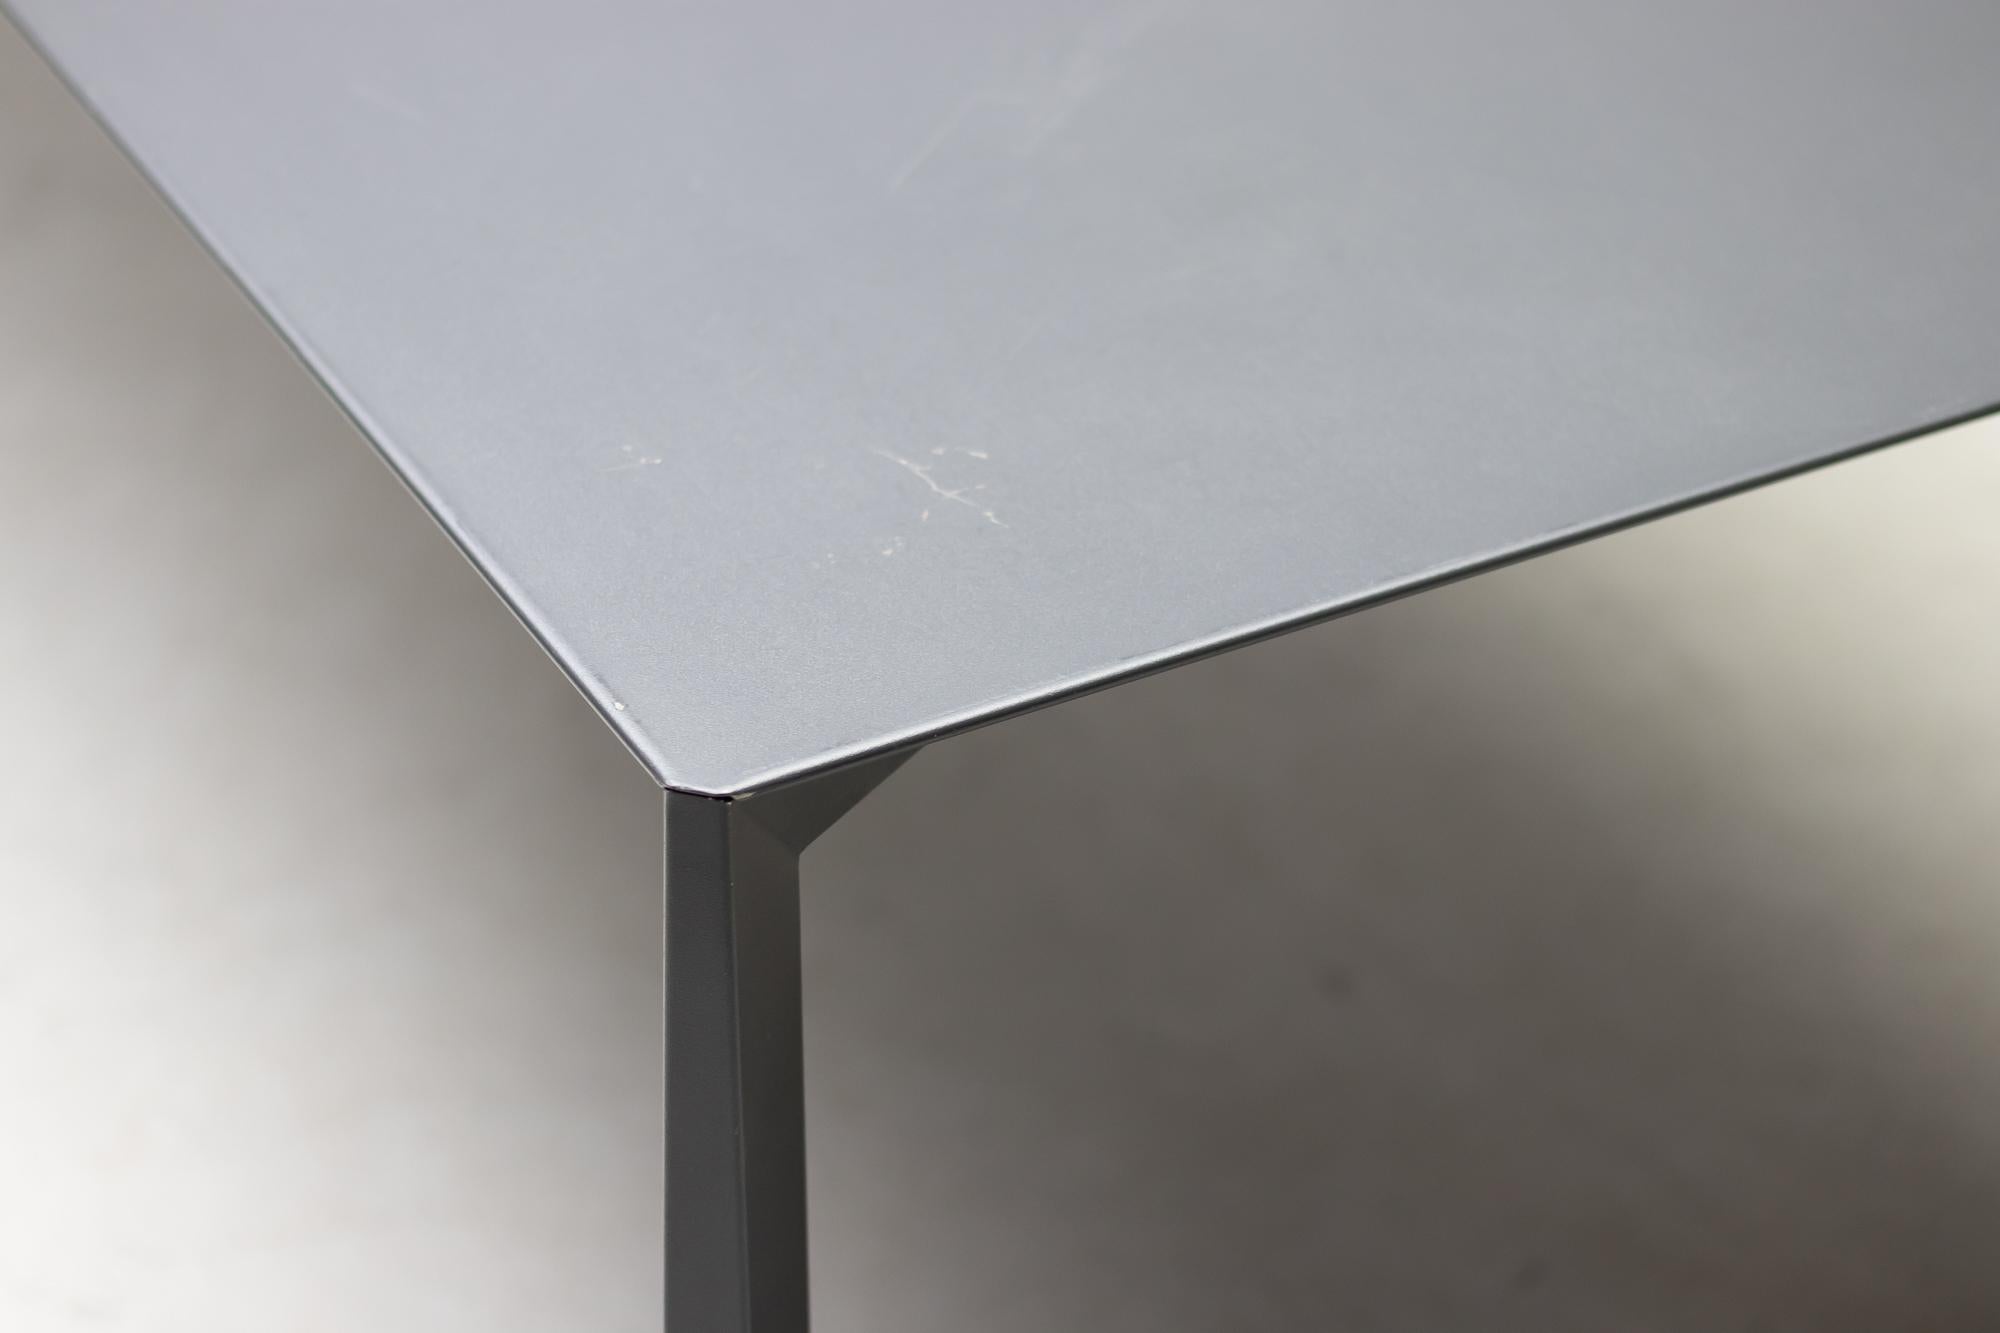 The Ovidio table has a freestanding structure and its geometric form seems to change depending on the point of view.
Large dining or writing table in origami style folded sheet metal, powder-coated in dark grey.
Four tables available, priced